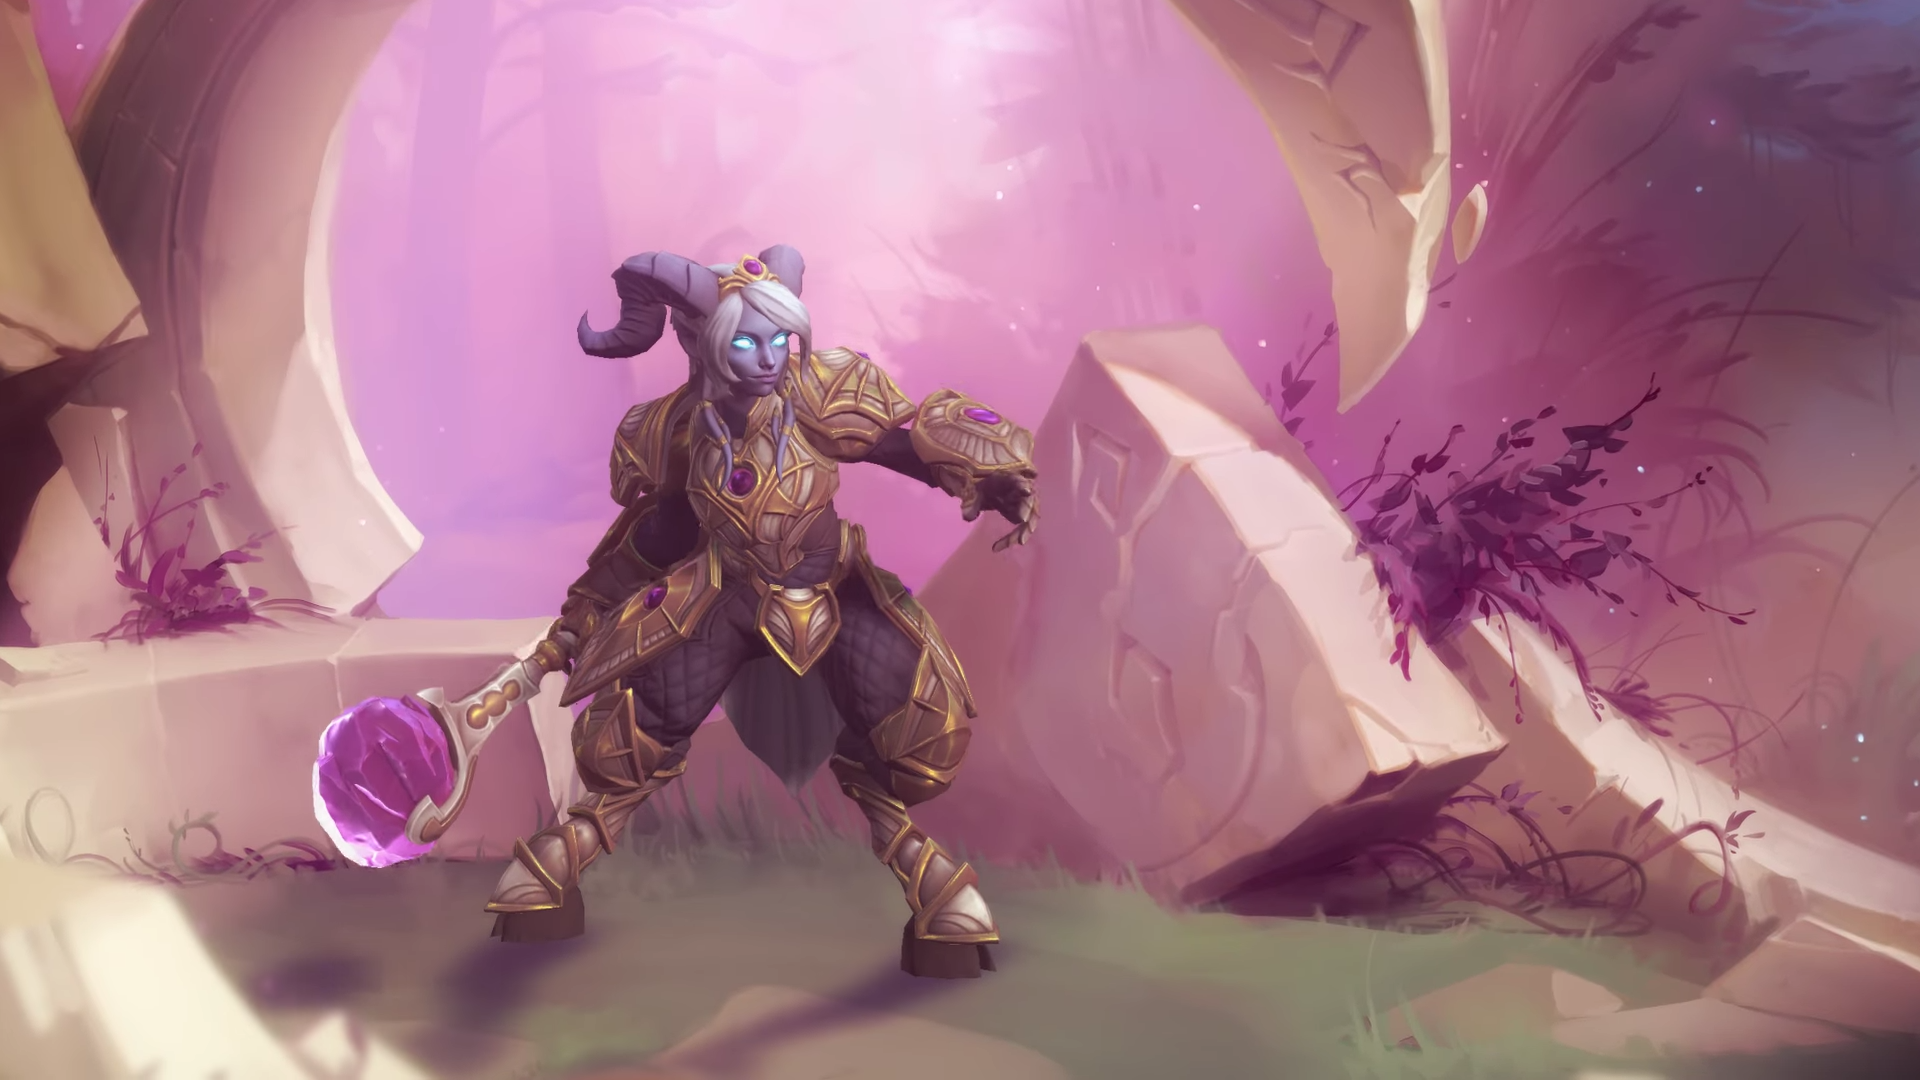 General 1920x1080 Heroes of the Storm Yrel draenei video games video game characters Blizzard Entertainment